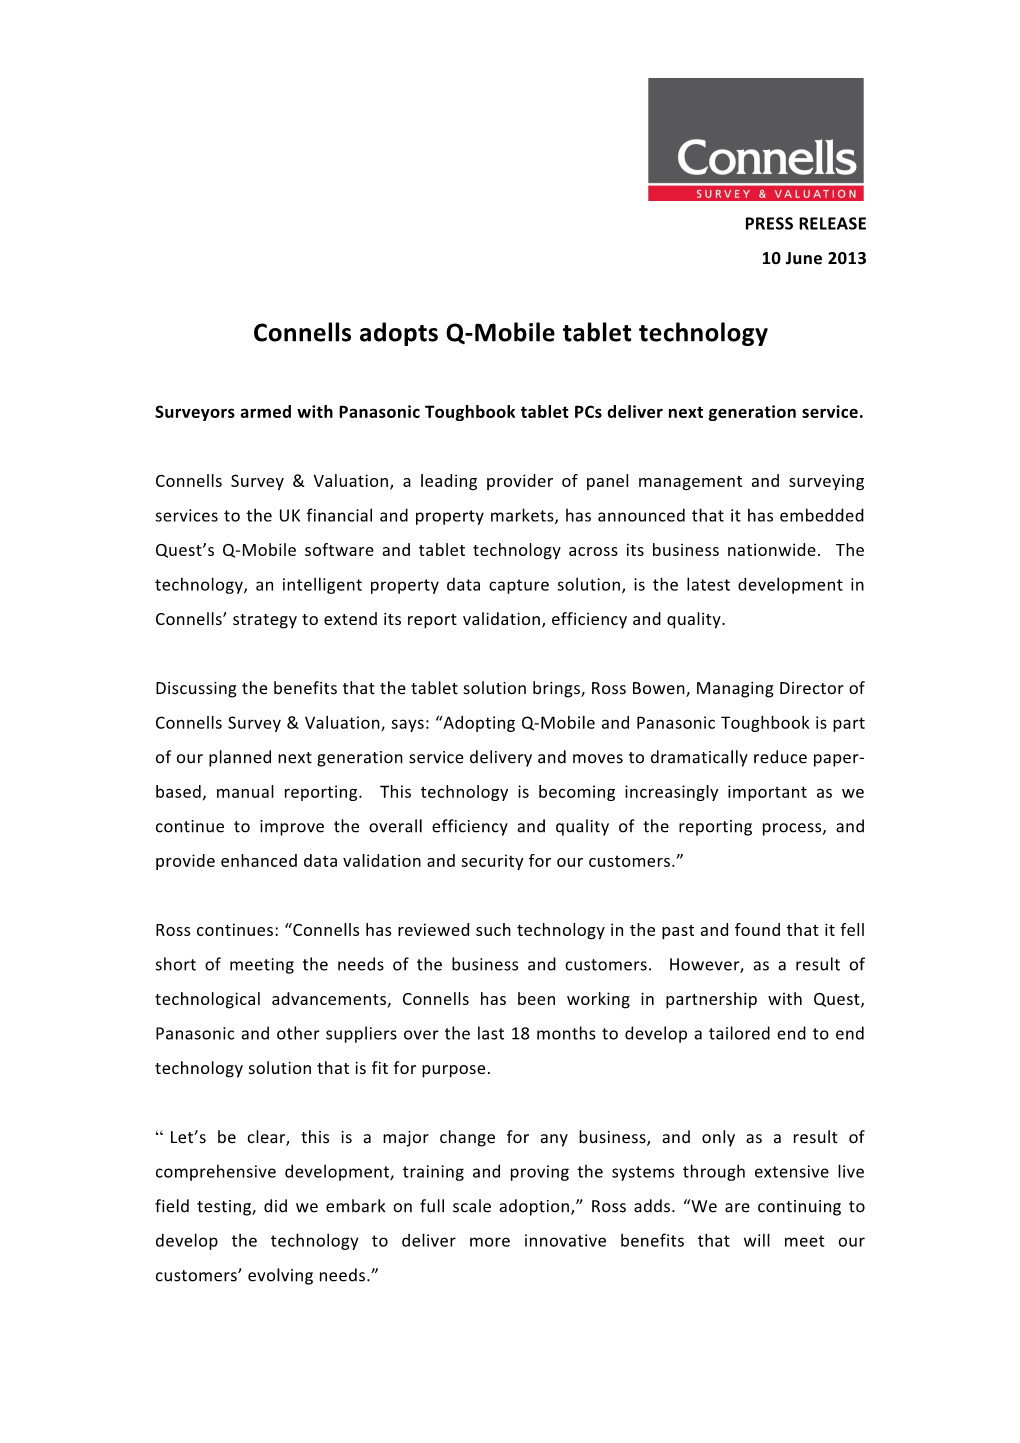 Connells Adopts Q-Mobile Tablet Technology